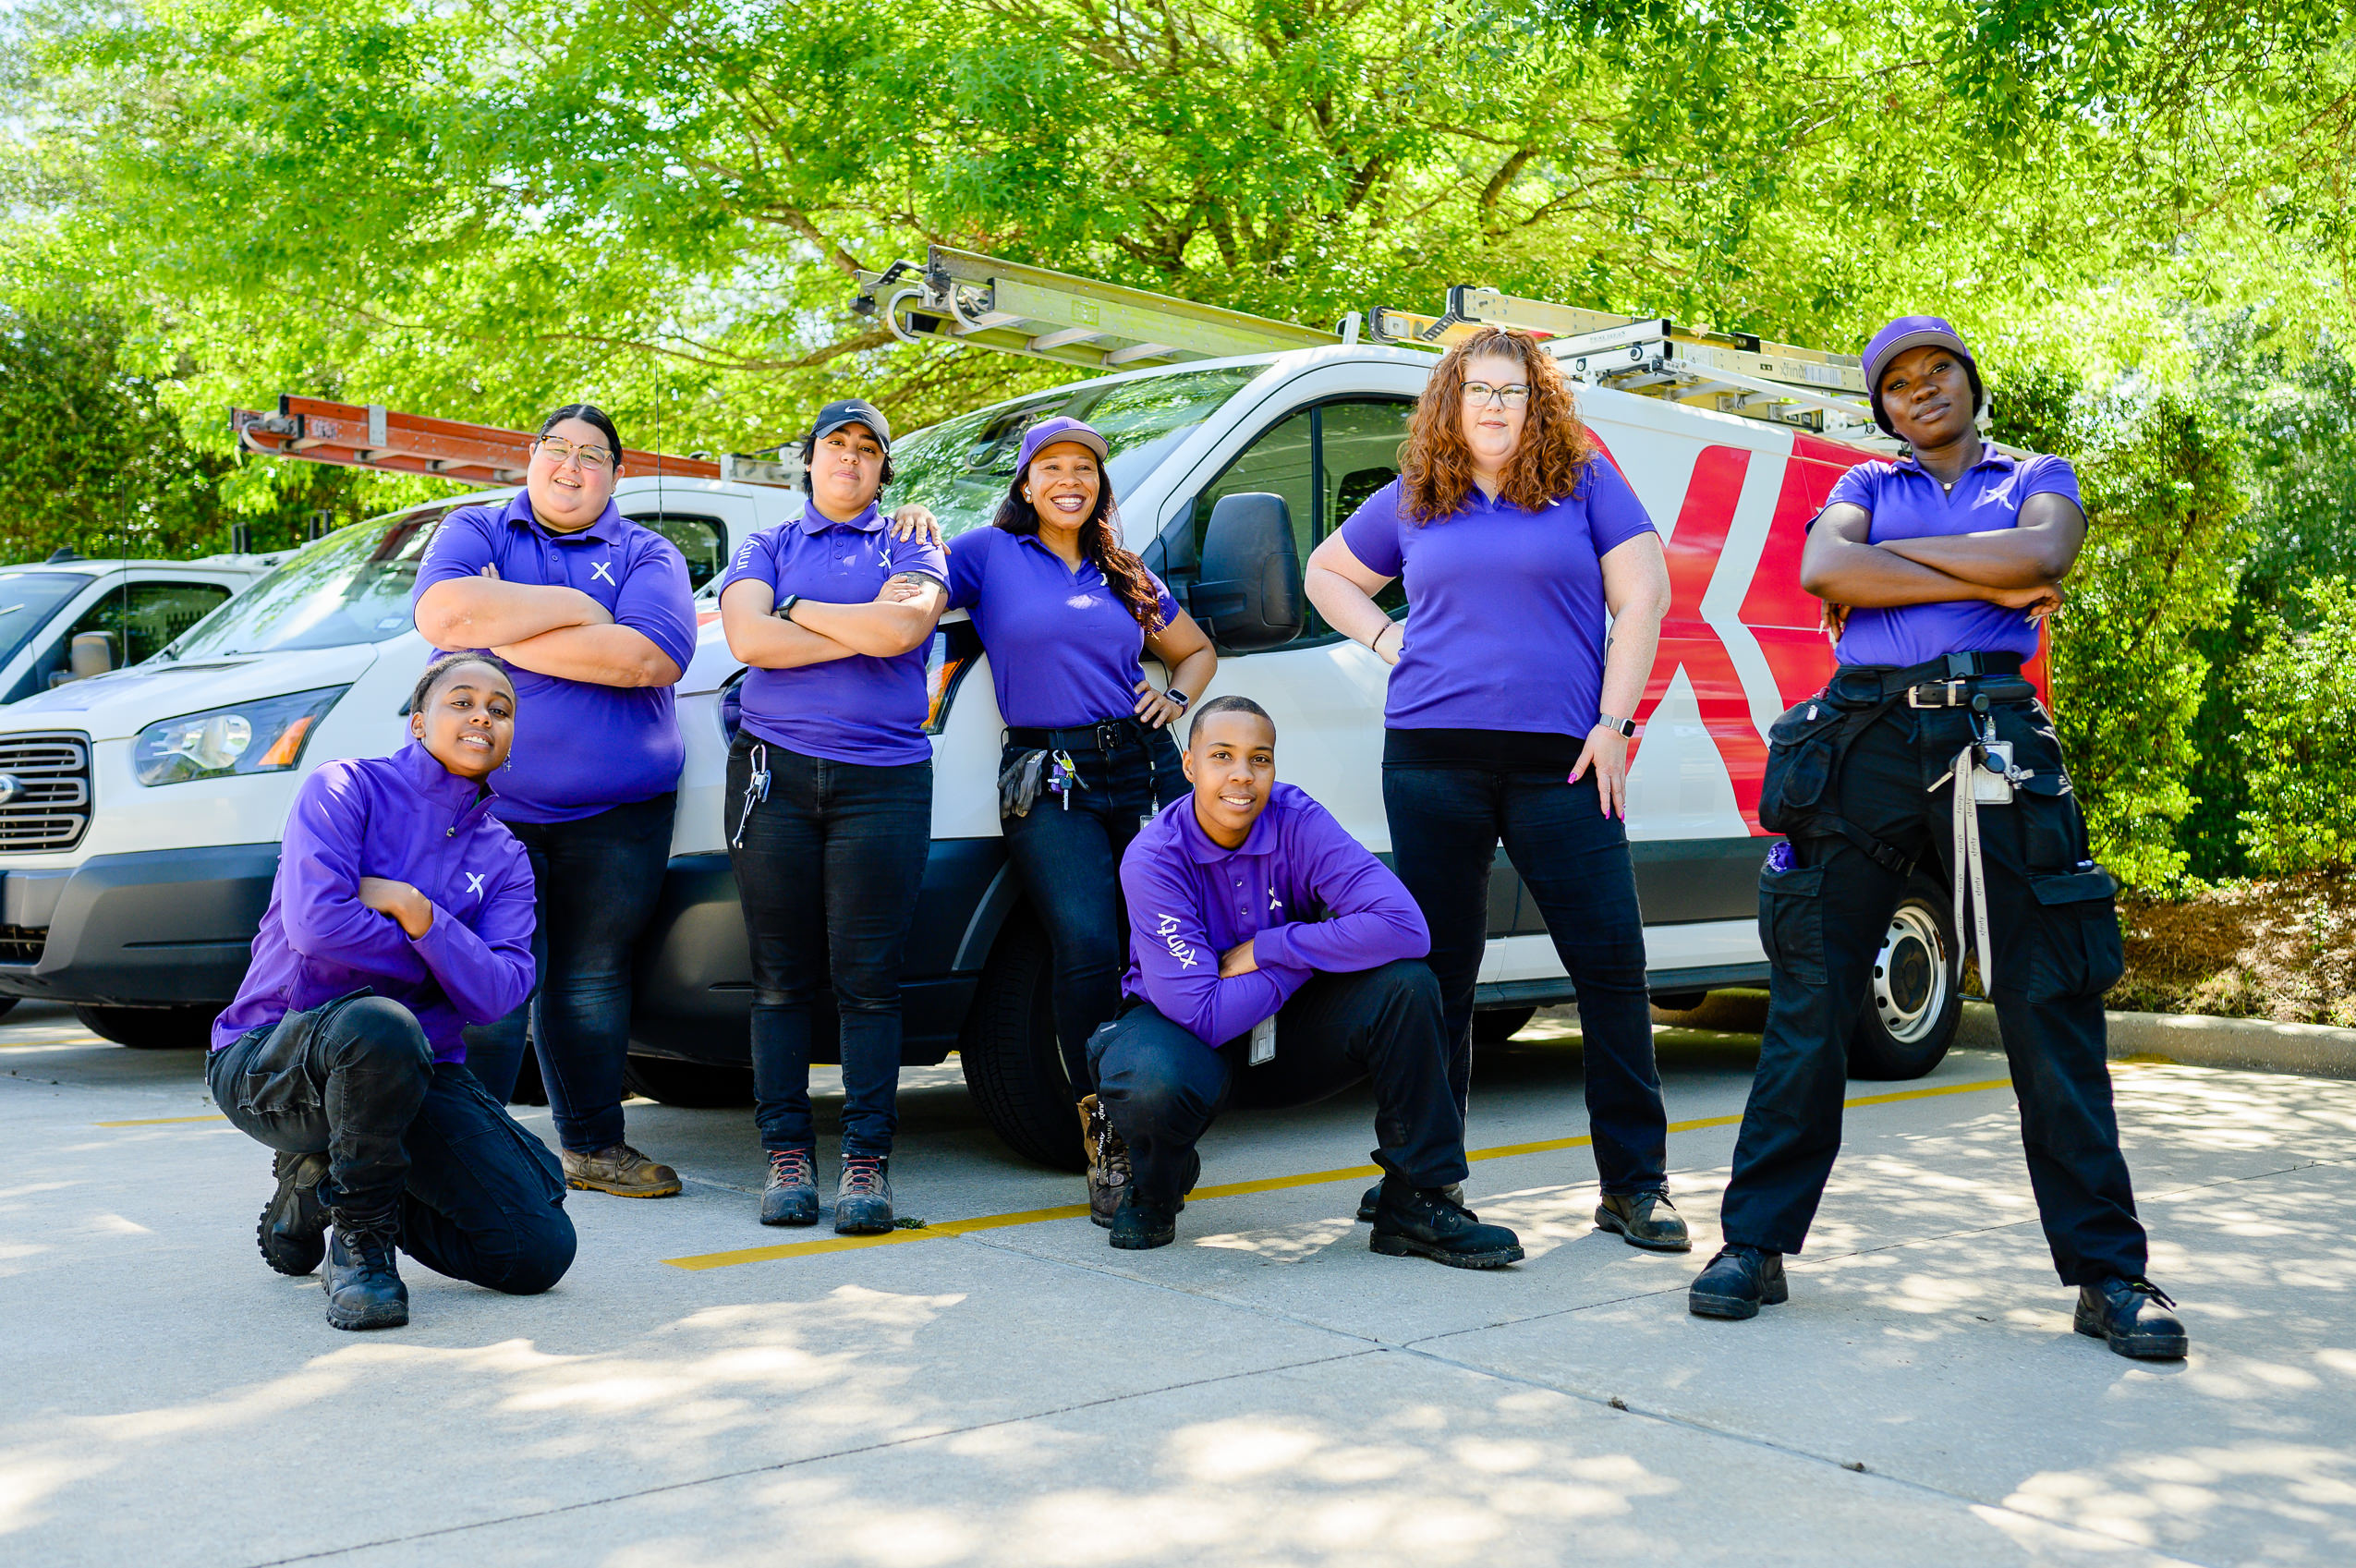 Comcast technicians pose for a group photo in The Woodlands, Texas.